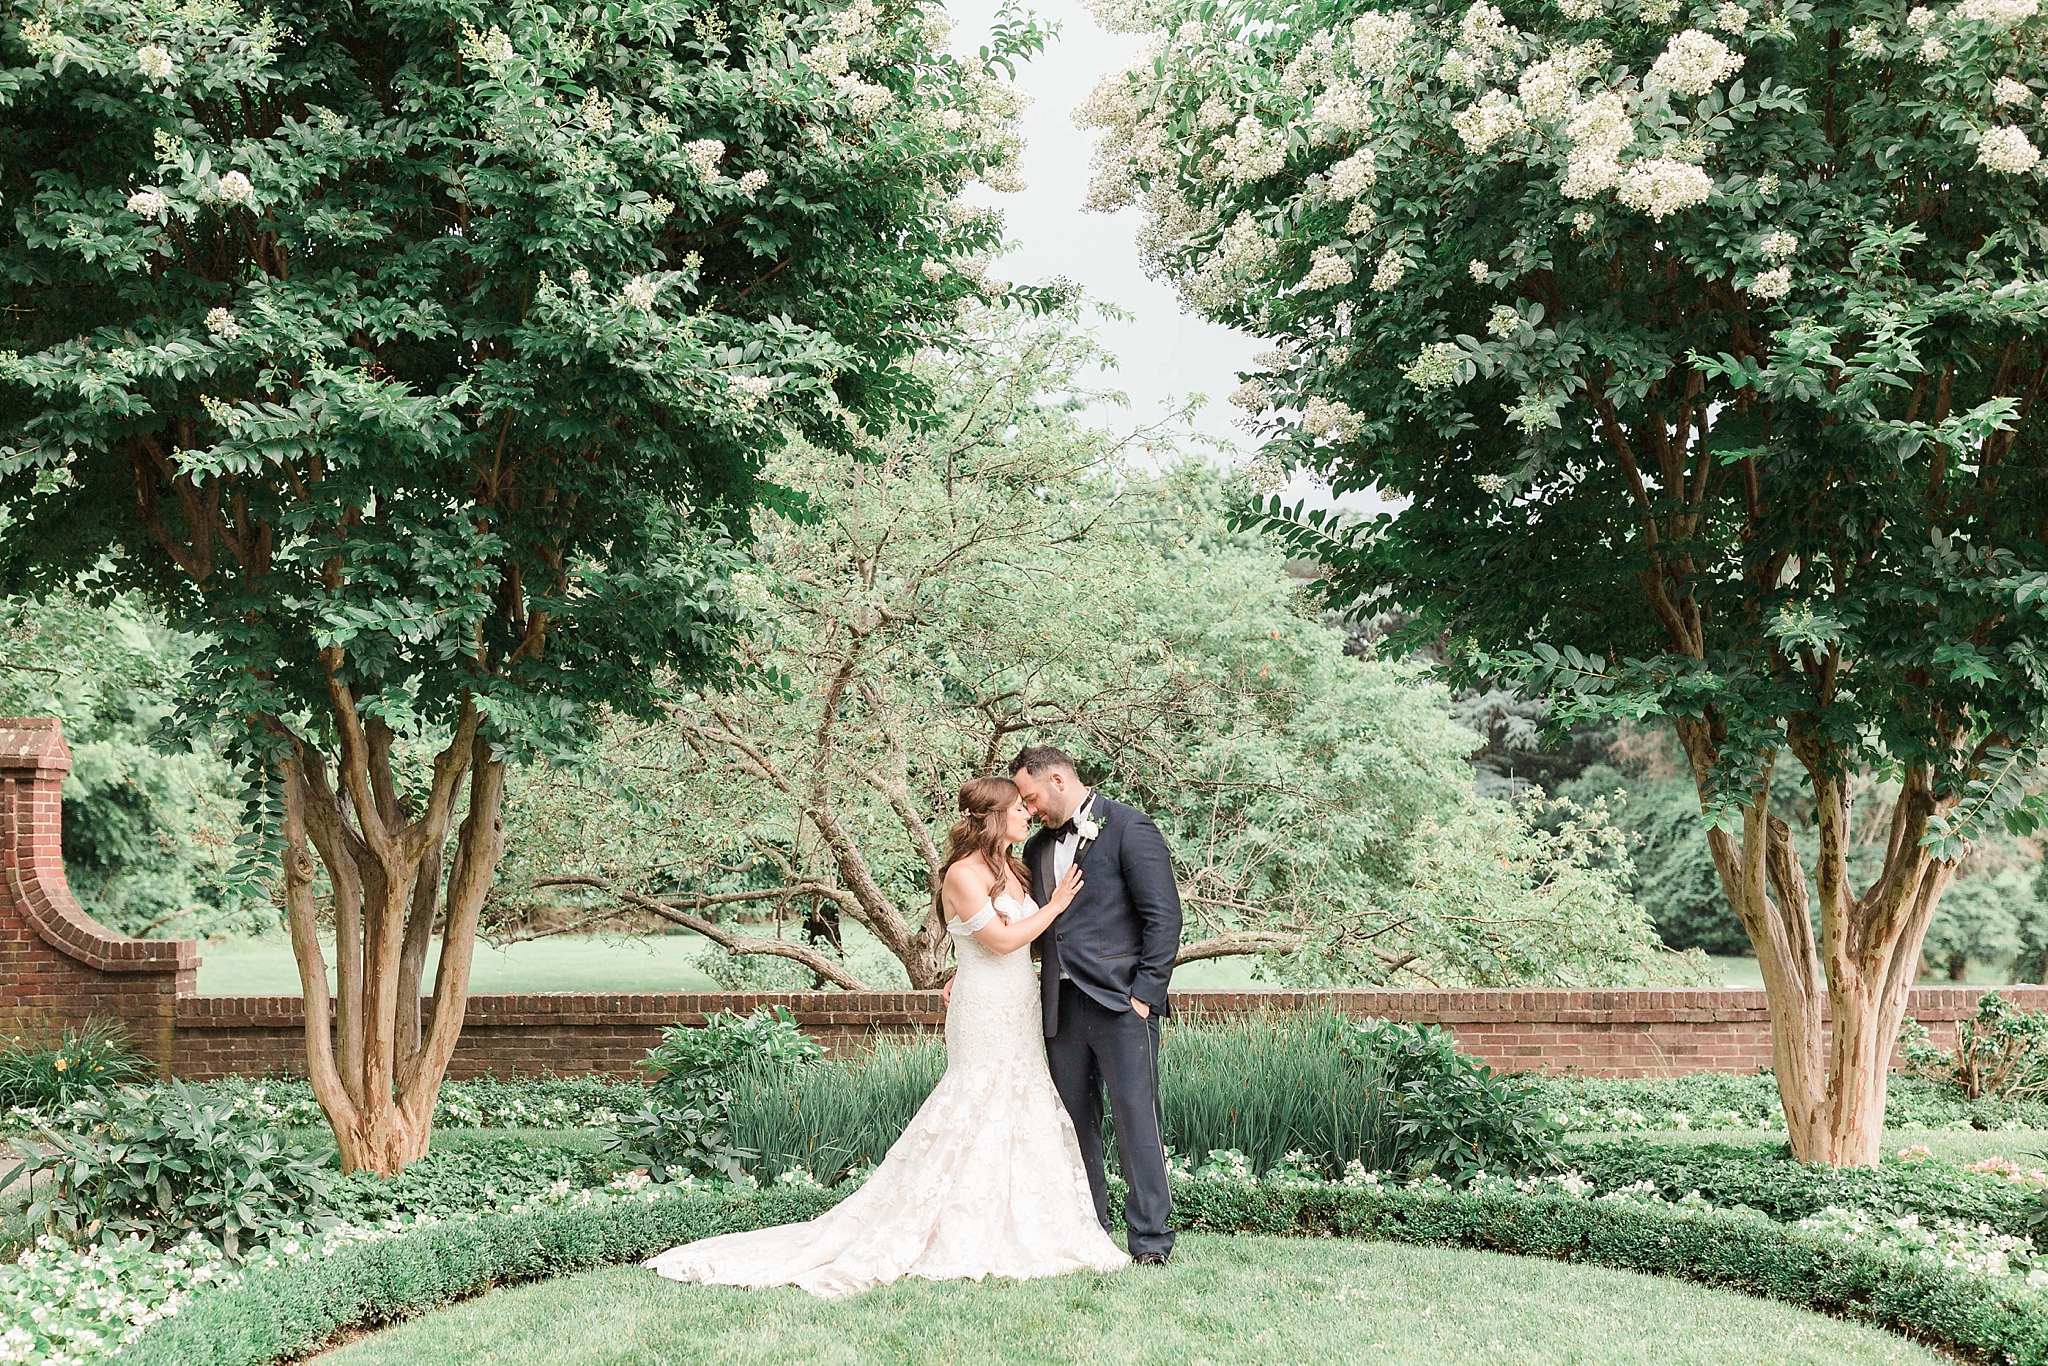 This elegant summer wedding at Oxon Hill Manor was styled by SRS Events and photographed by Alicia Lacey.